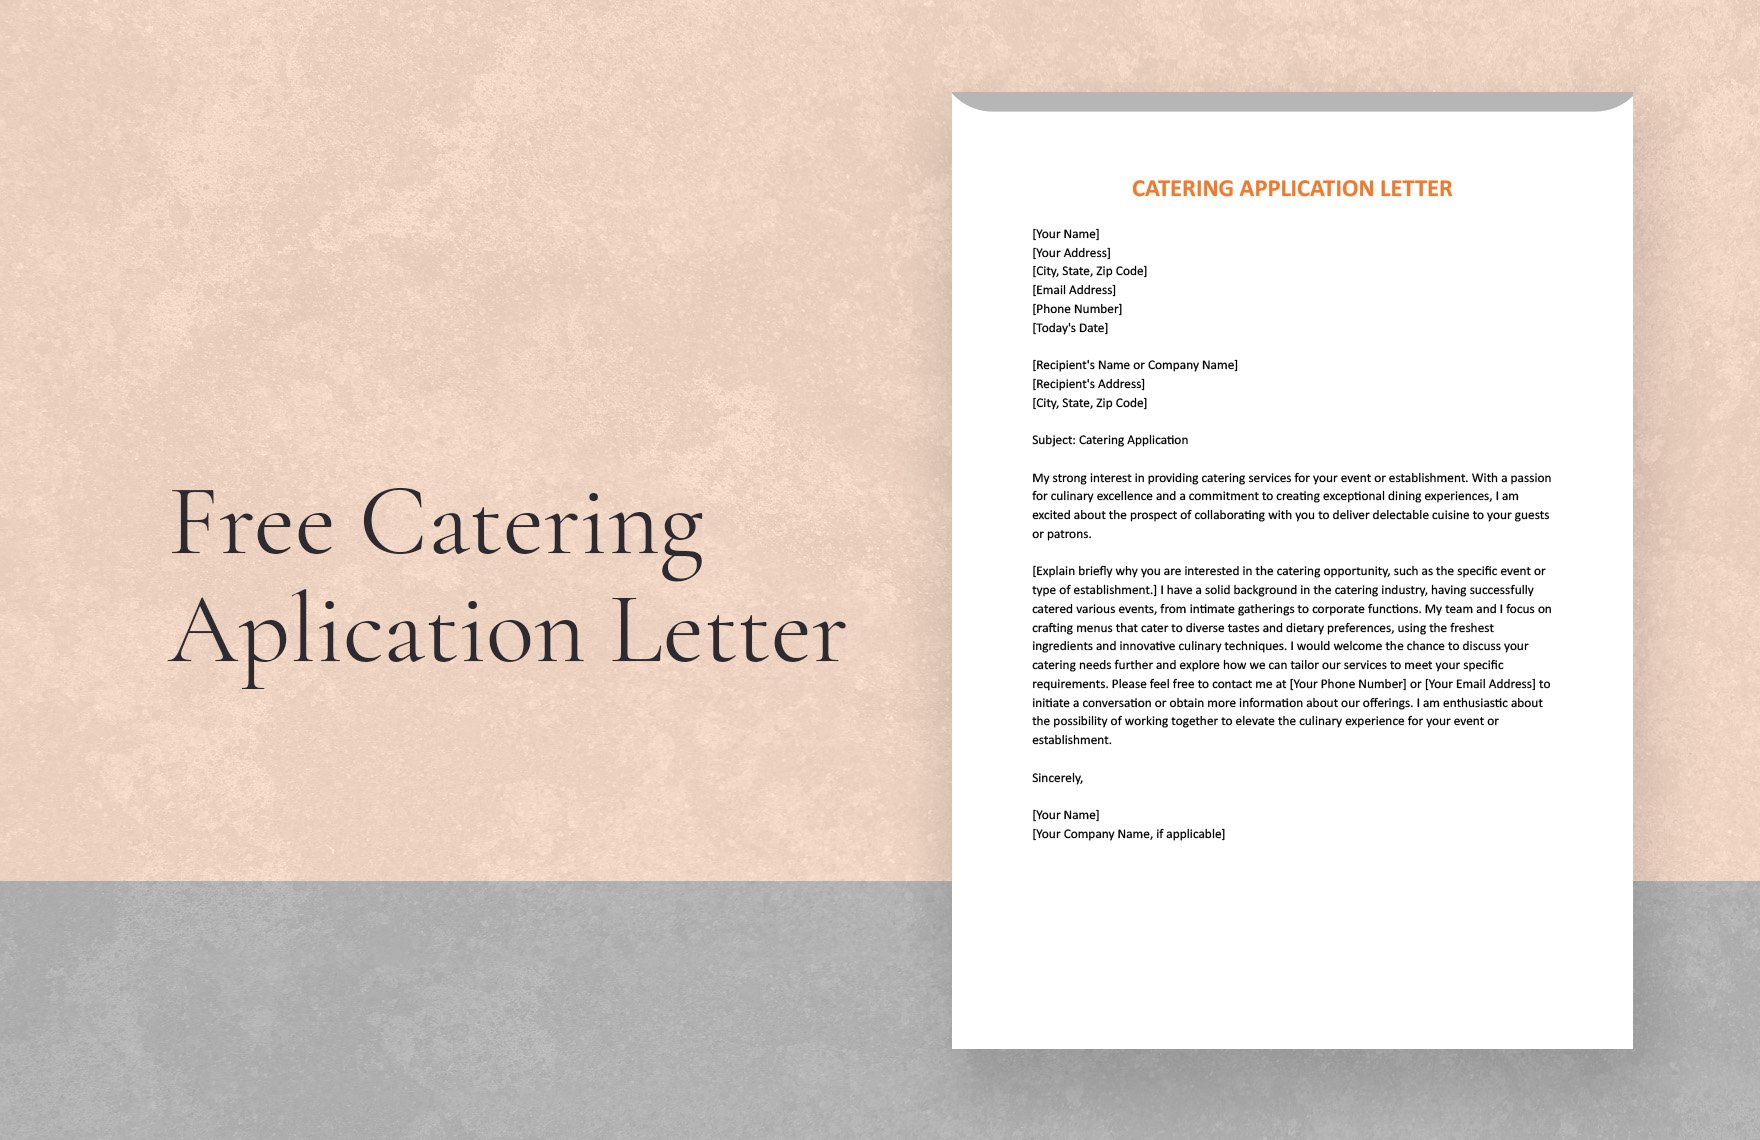 Free Catering Application Letter